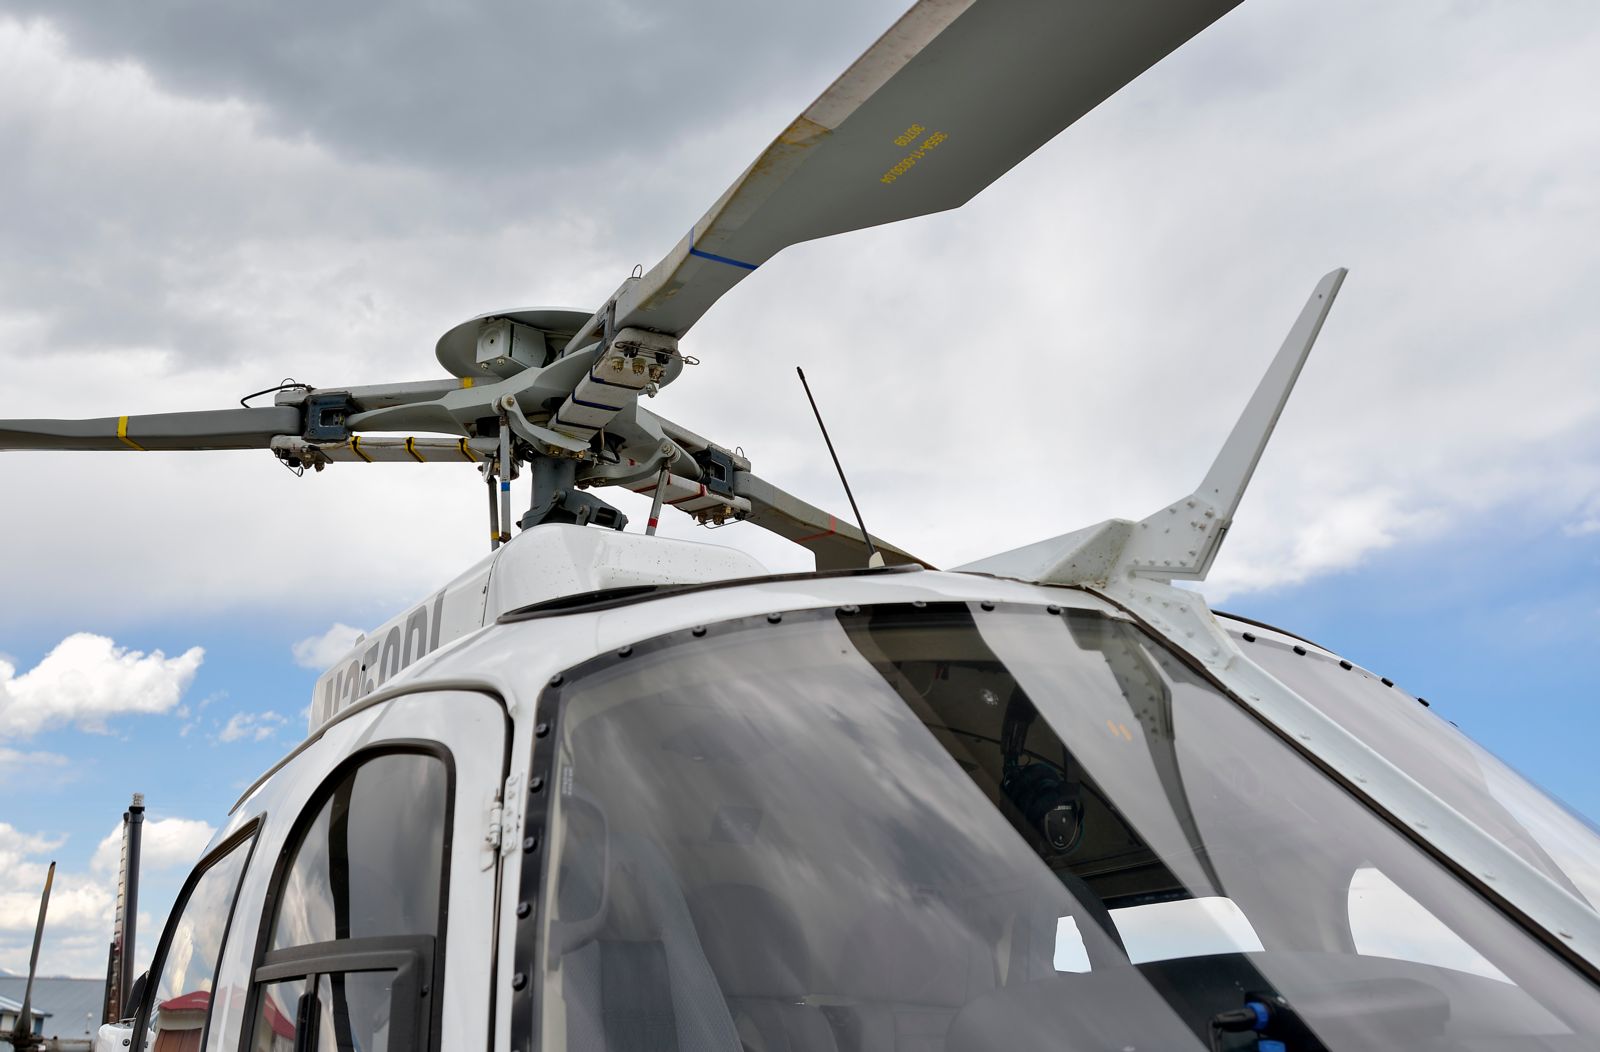 Eurocopter AS350 B3  S/N 4508 for sale | gallery image: /userfiles/images/Eurocopter_AS350B3_sn4508/ext3_300.jpg